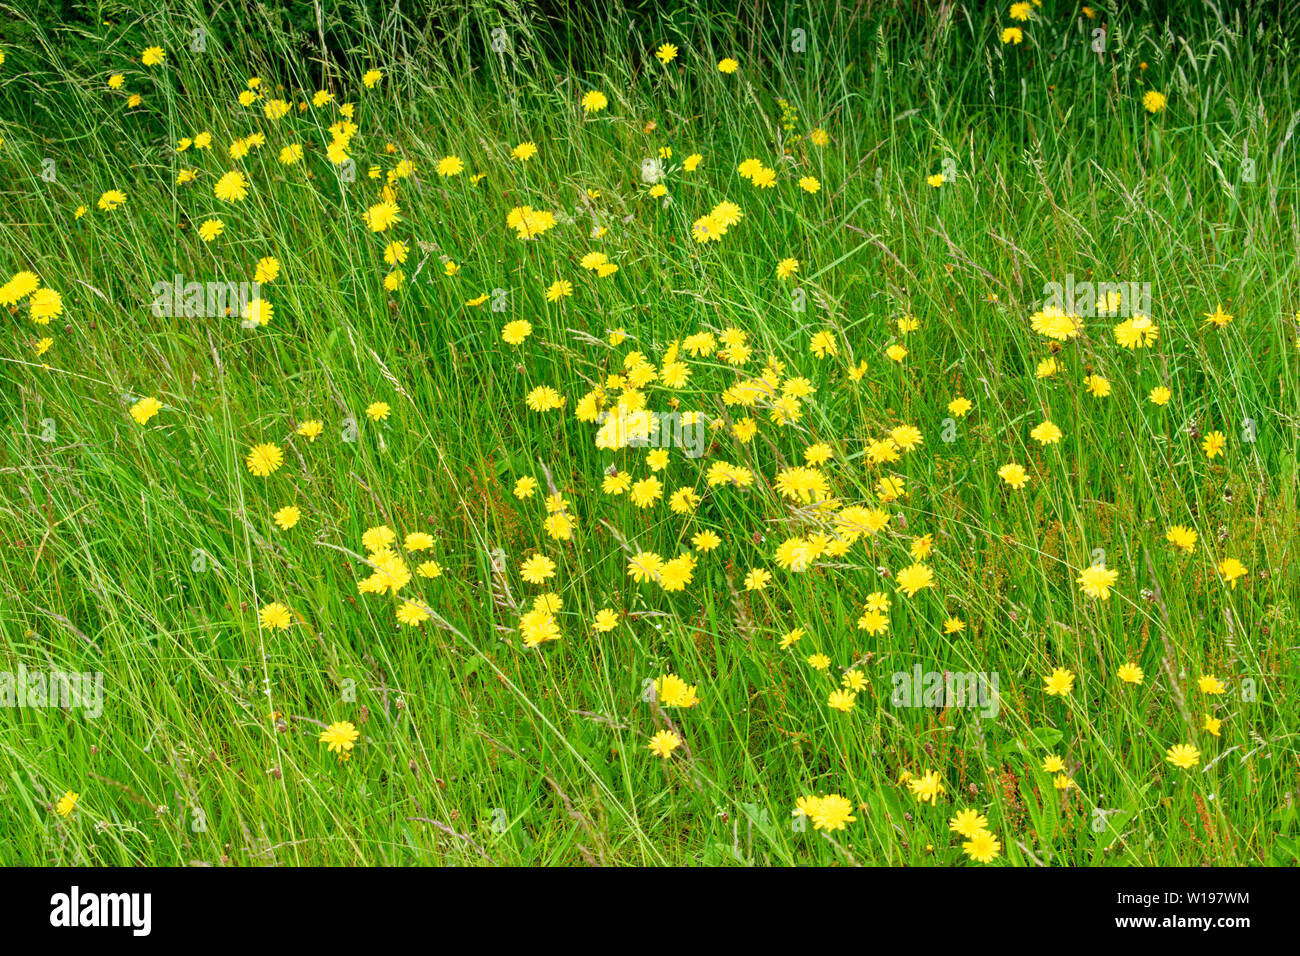 RIVER FINDHORN SCOTLAND WILD FLOWERS IN SUMMER THE YELLOW FLOWERS OF SMOOTH HAWKS-BEARD Crepis capillaris AMONGST SUMMER GRASSES Stock Photo